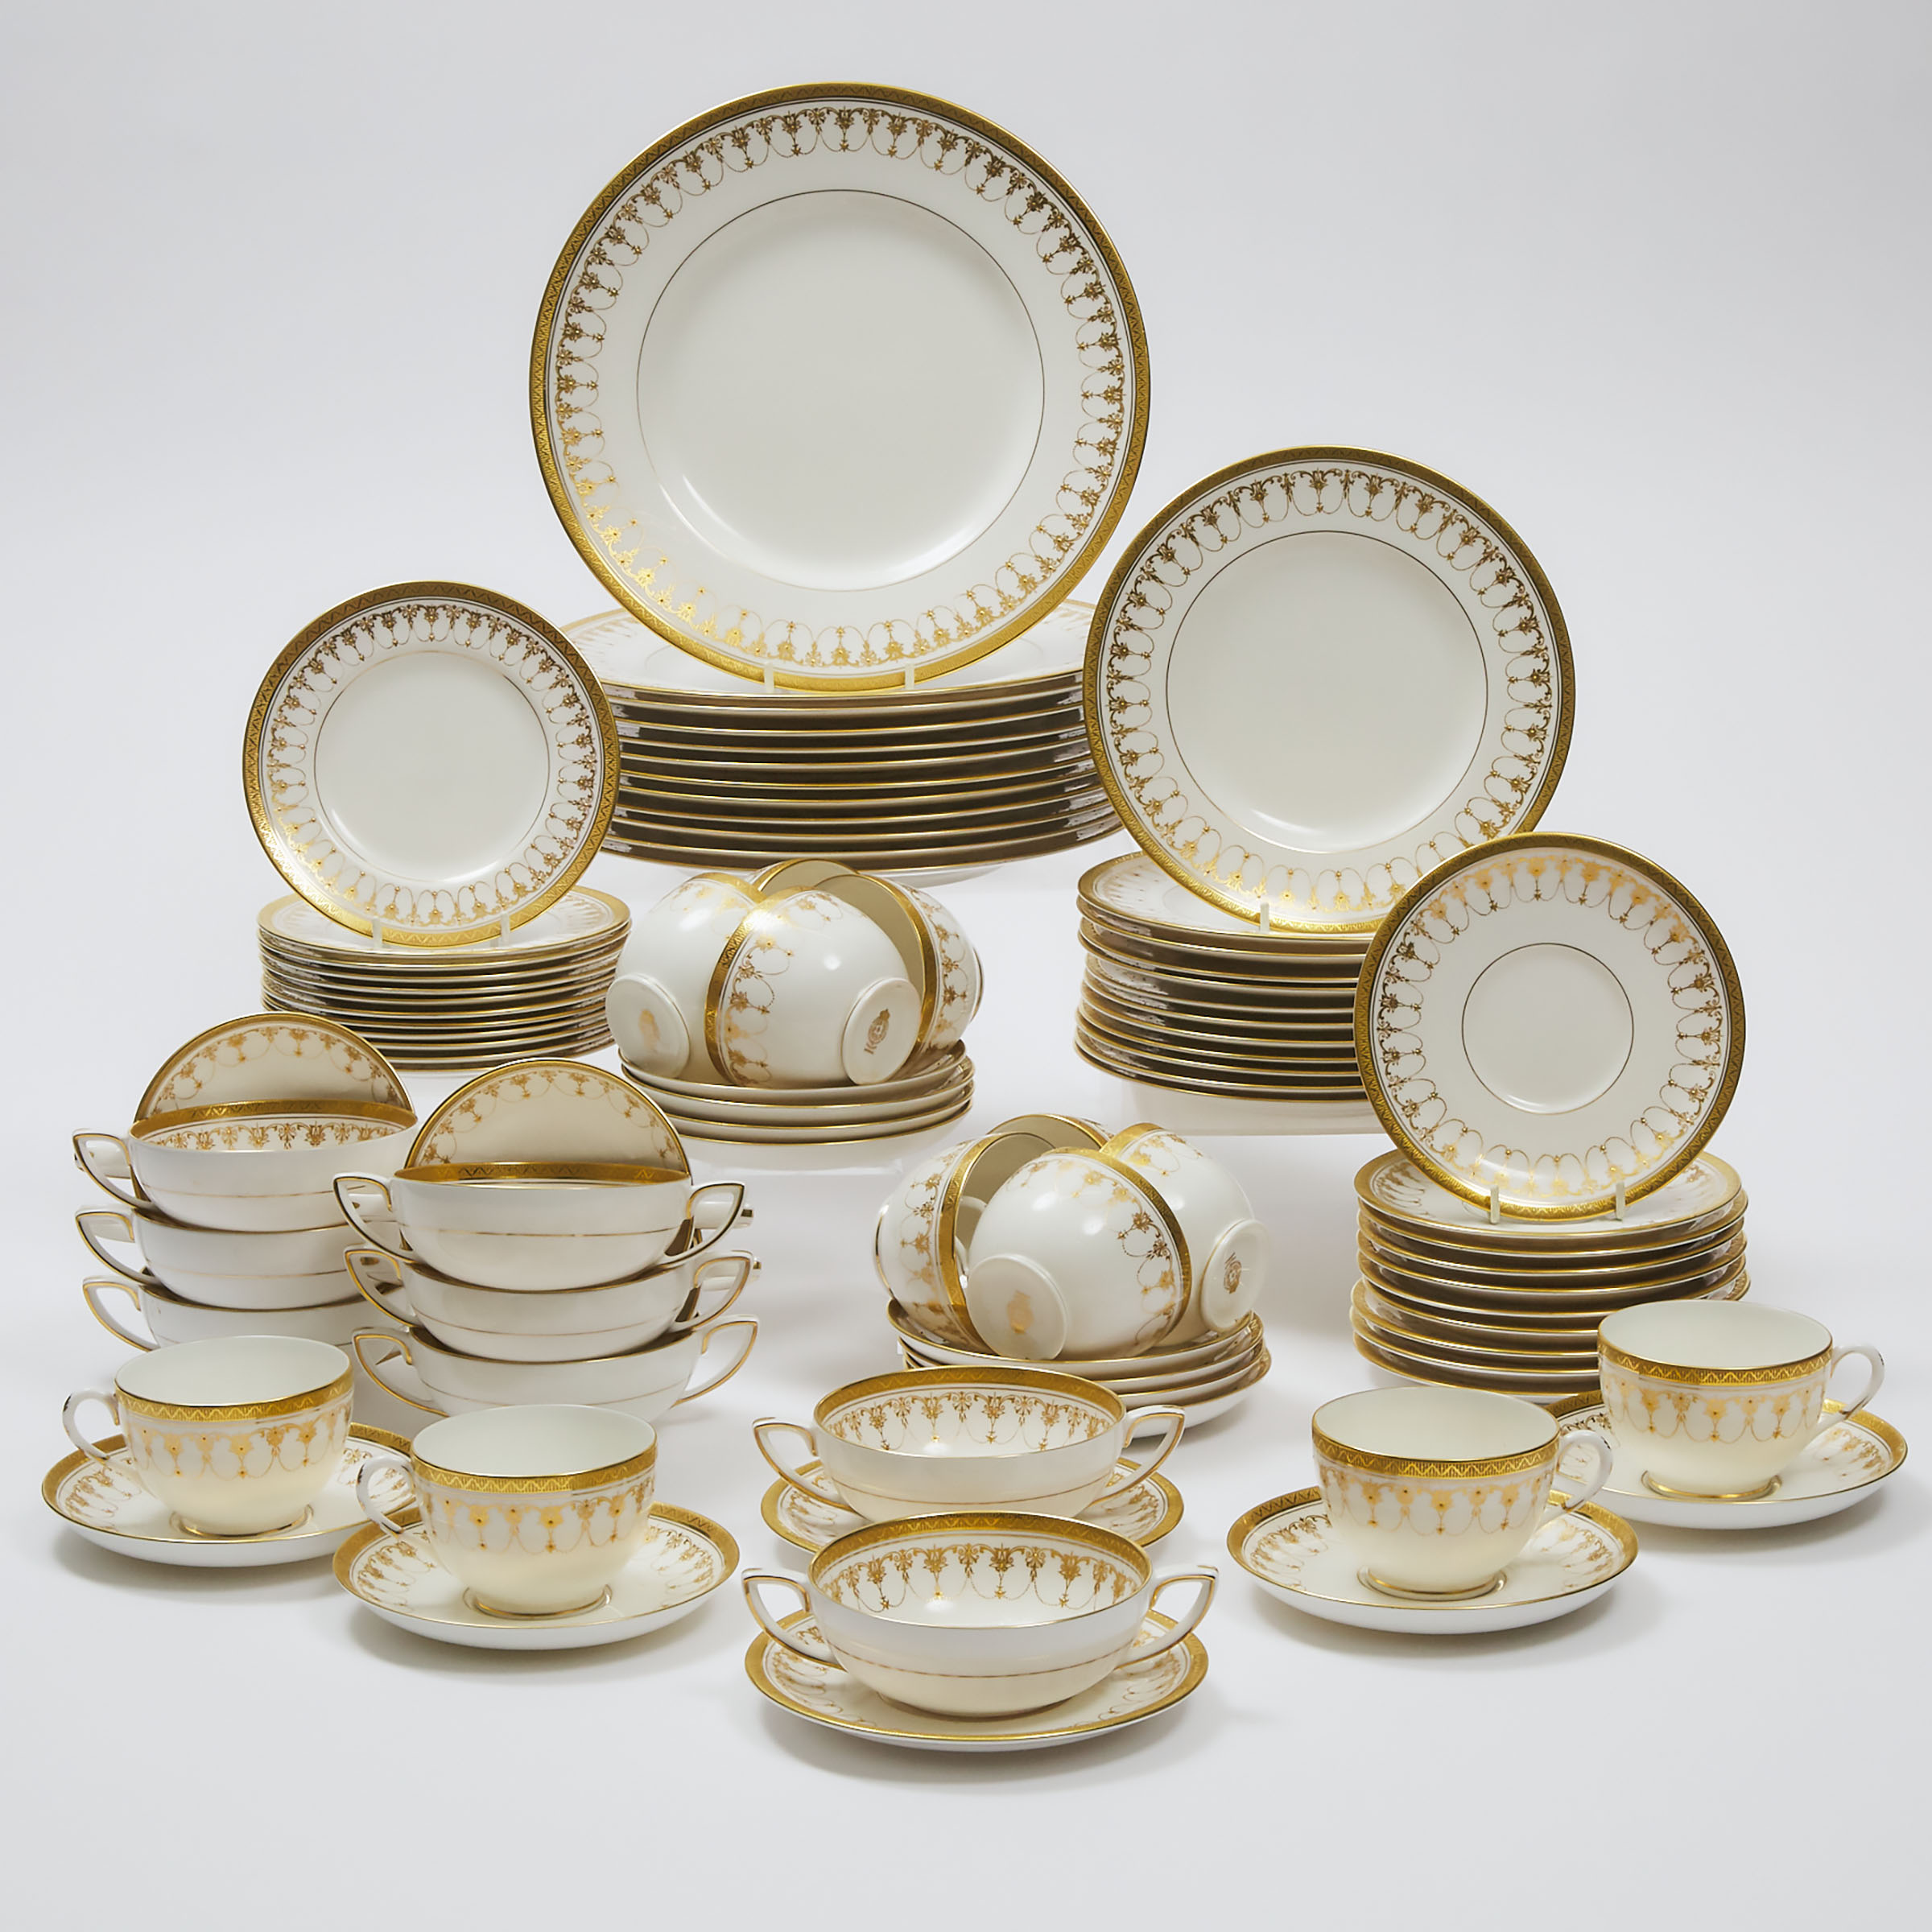 Royal Worcester 'Imperial' Pattern Service, 20th century